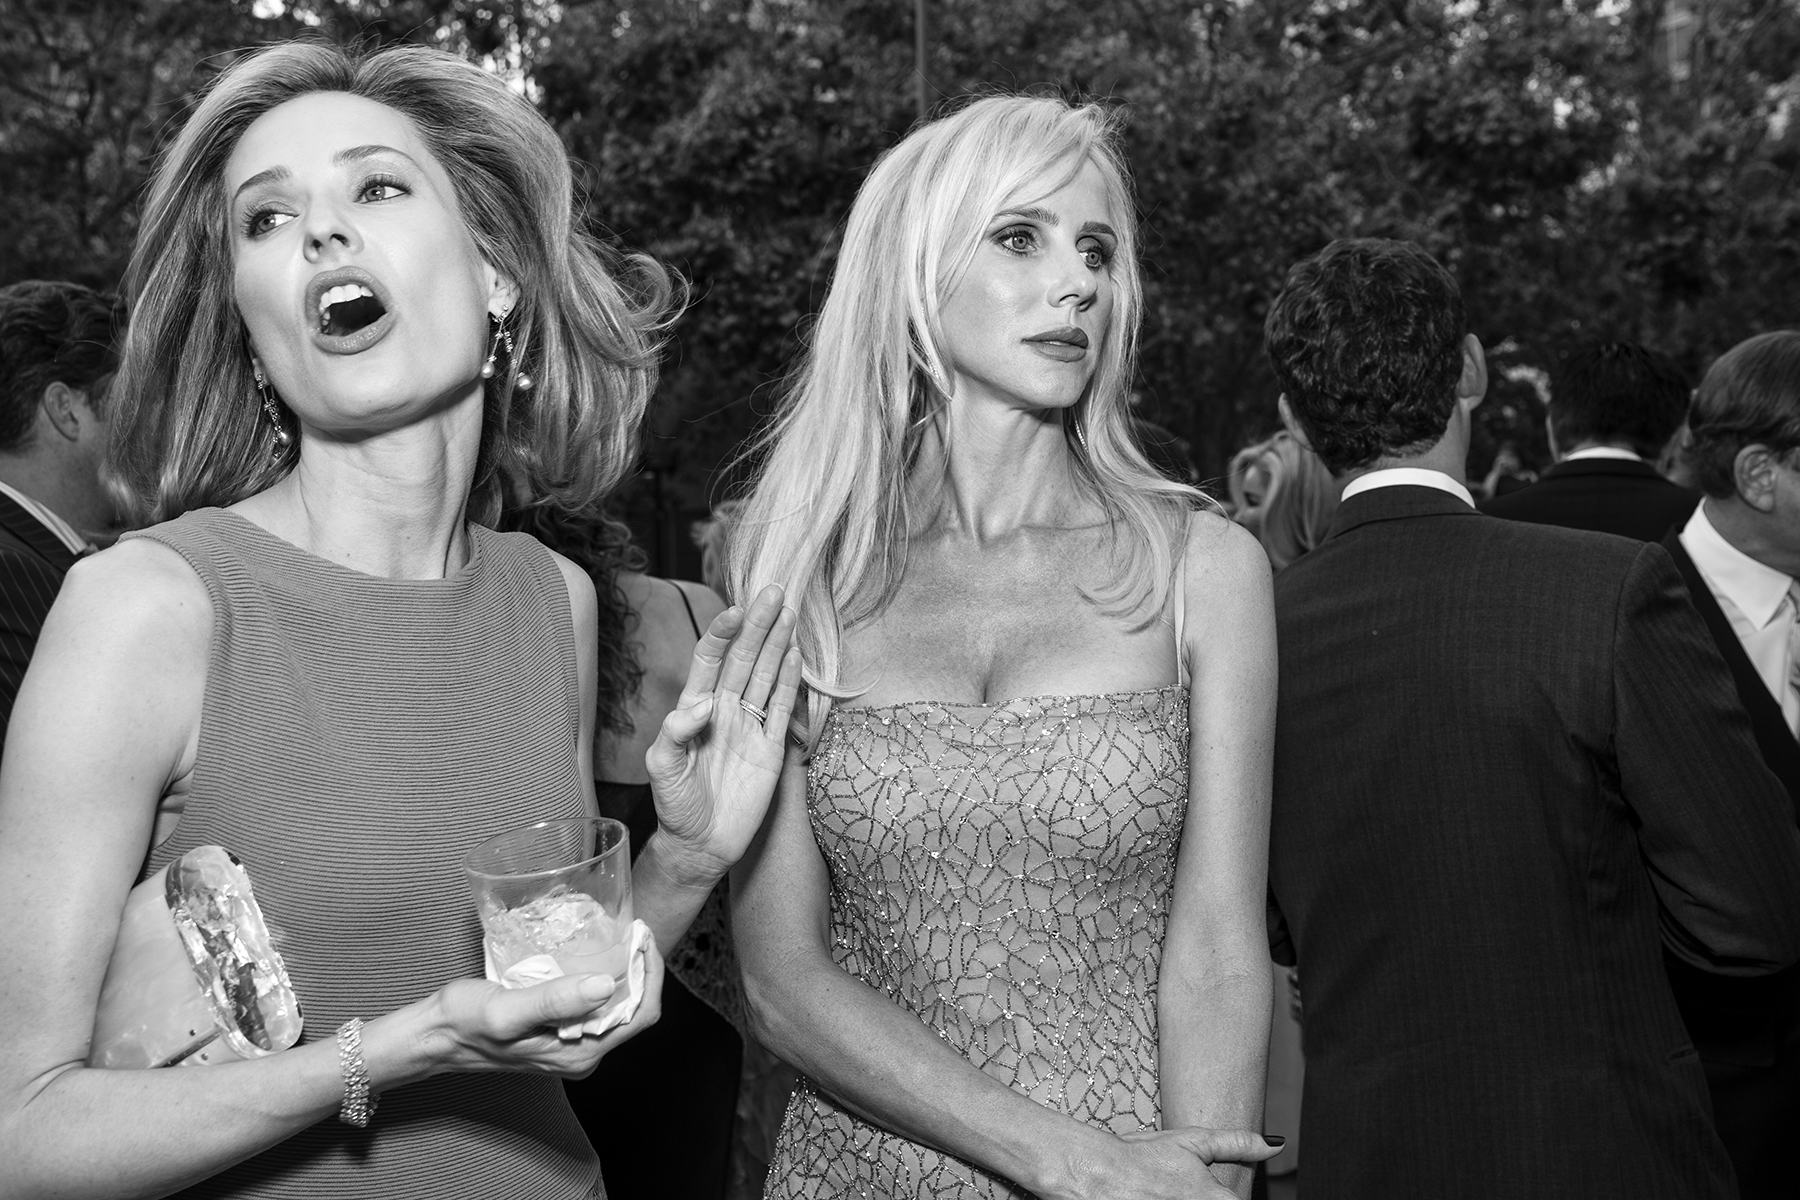 Kate Harbin Clammer (left) and Vanessa Getty attend the cocktail hour at Modern Ball, a fundraiser for the San Francisco Museum of Modern Art, in San Francisco, Calif., on Wednesday, April 30, 2014. This photograph is of a candid moment and was not directed in any way. 